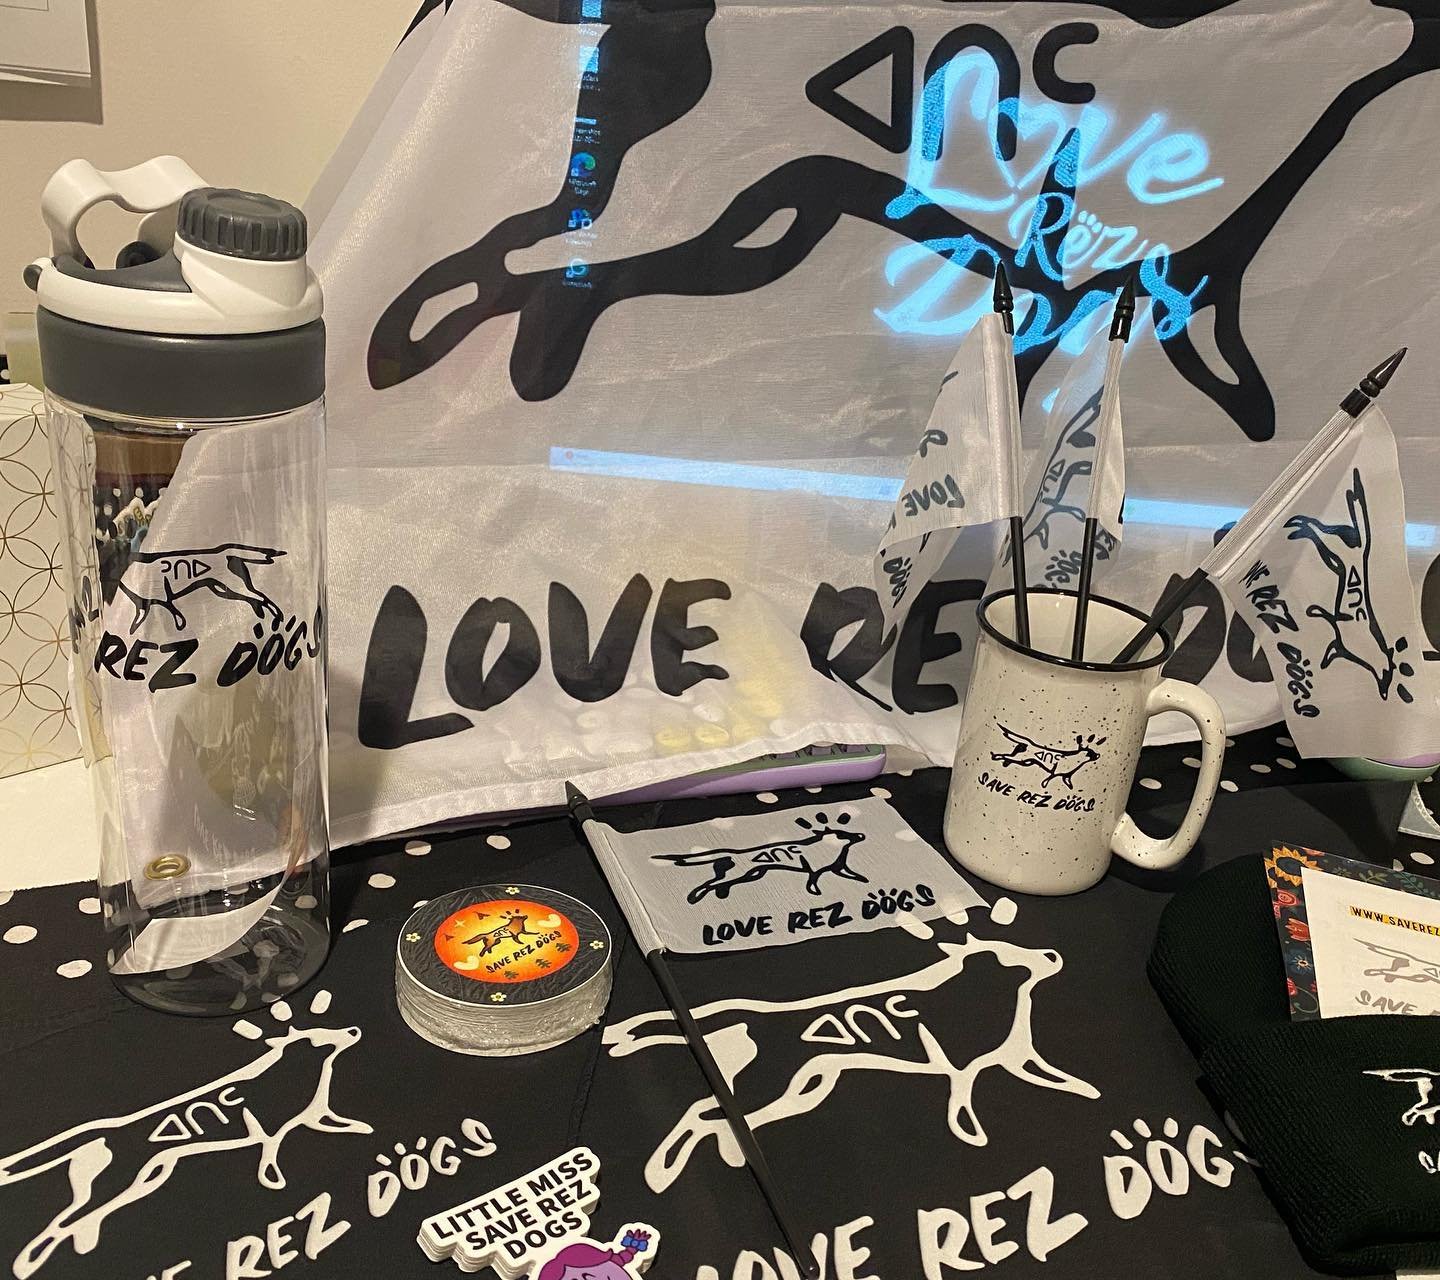 Get your Save Rez Dogs merch before it&rsquo;s gone! Water bottles, coffee mugs, bandanas, flags &amp; more are available on the website until quantities last. 
Link in bio~ WWW.SAVEREZDOGS.COM 🐶

New merch is coming this summer! We have to clear wh